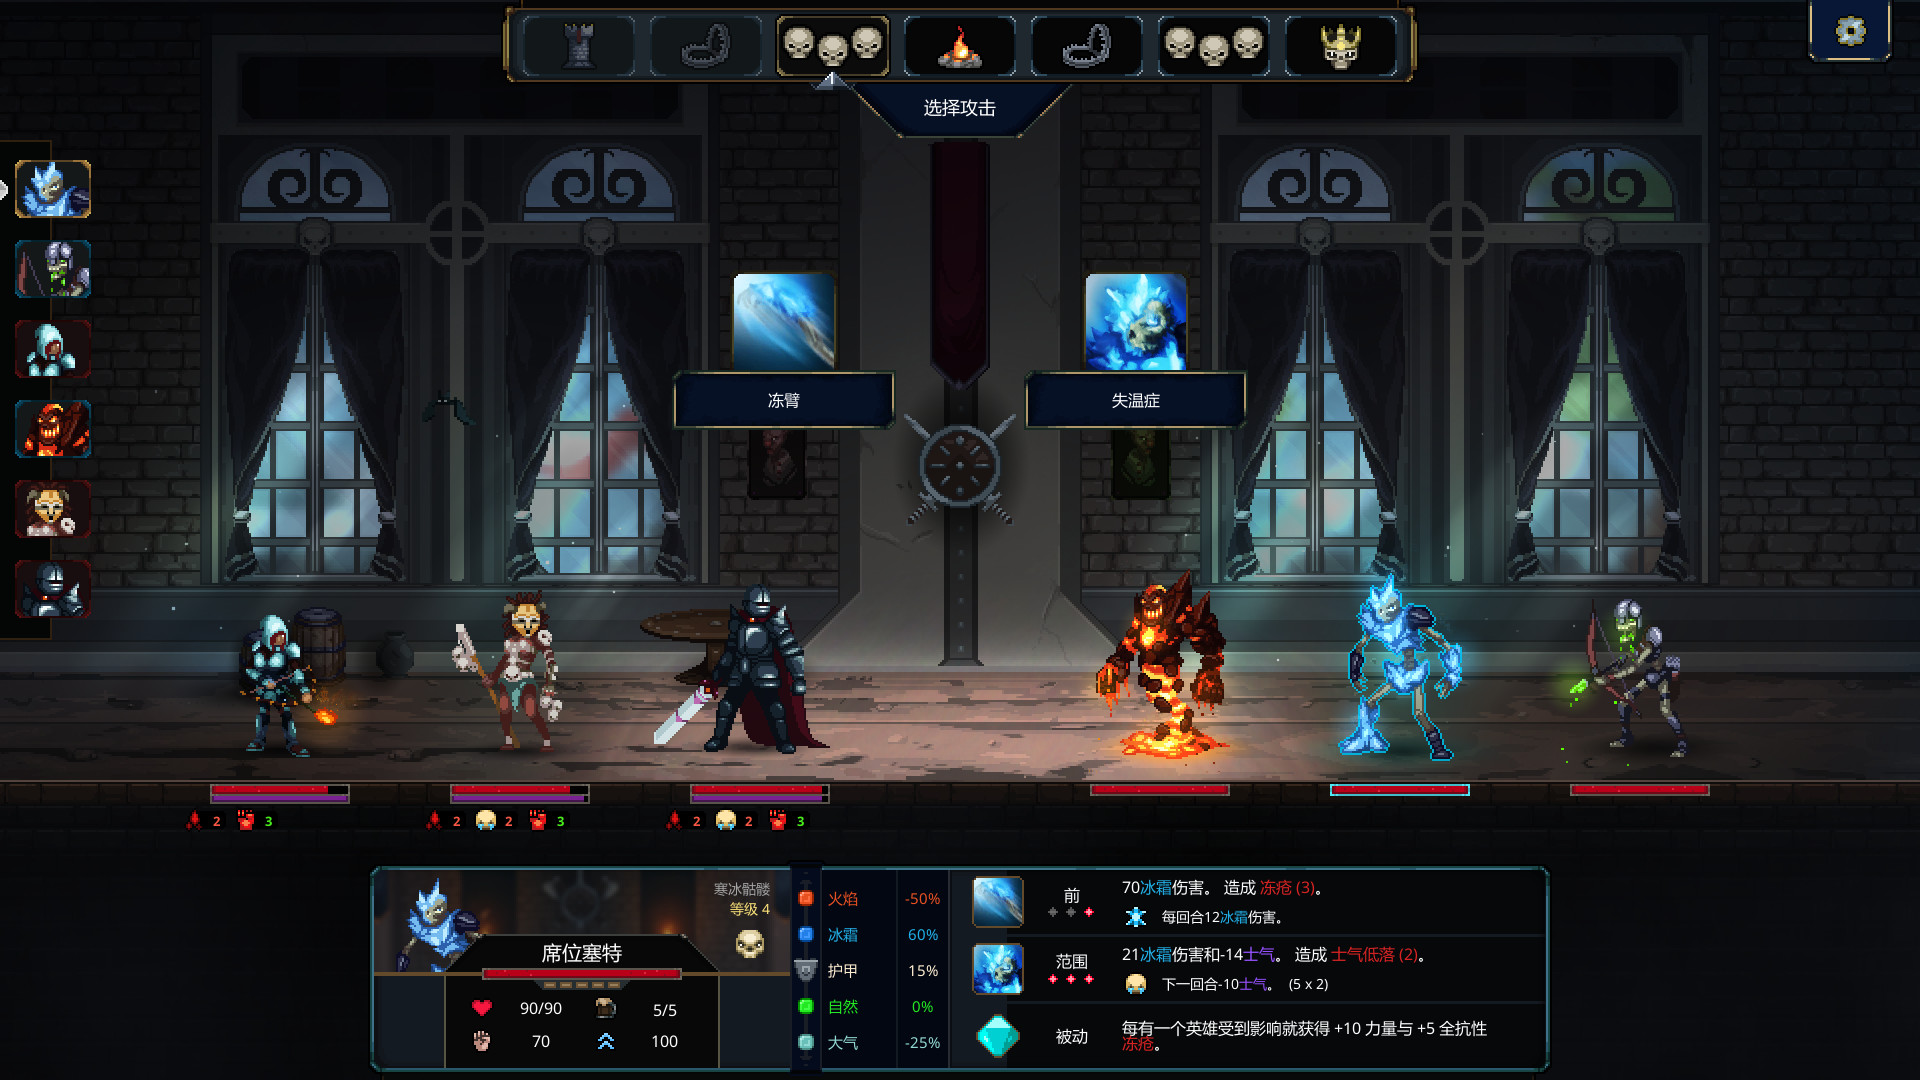 Legend of Keepers - Career of a Dungeon Master 1.0.9 Mac 破解版 魔王大人，击退勇者吧